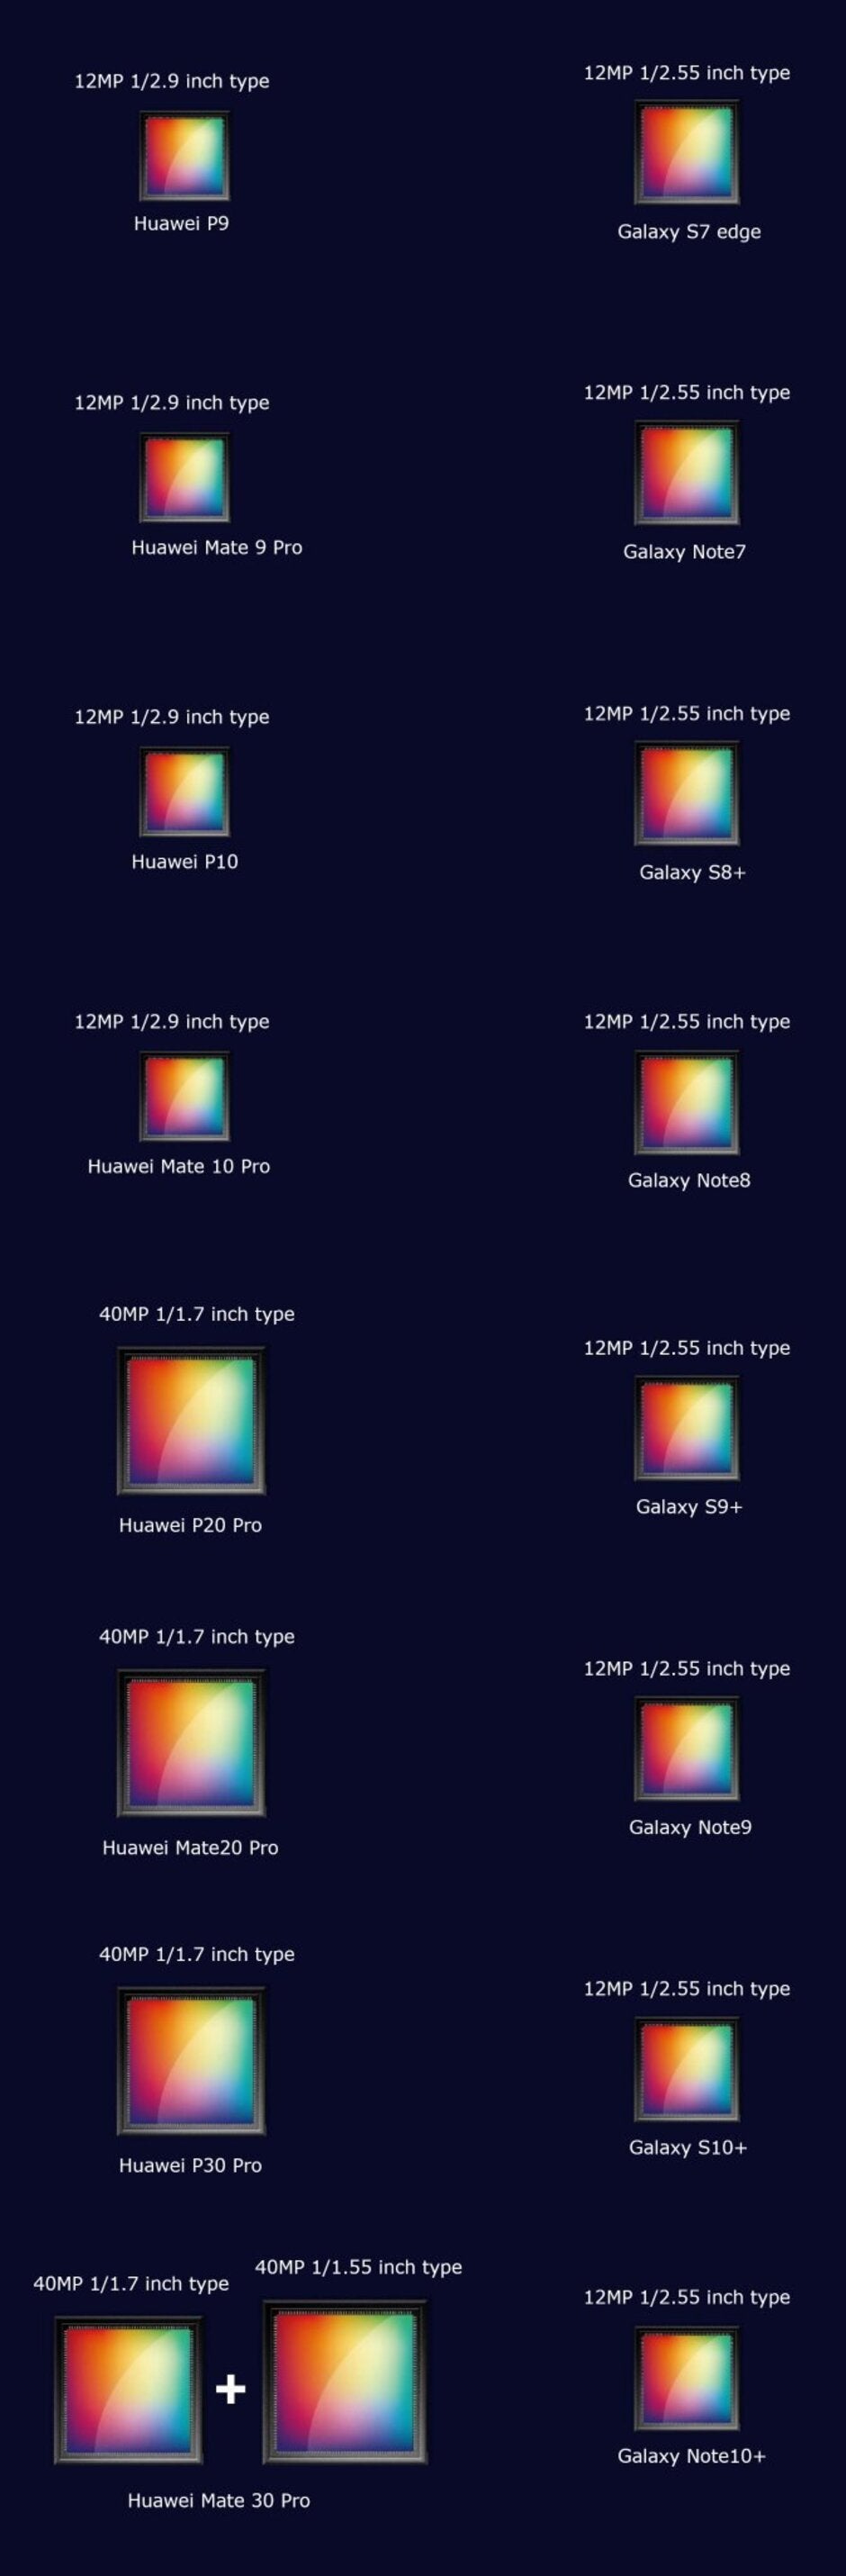 The S11 is due for a camera upgrade - The Galaxy S11 camera may surprise us all